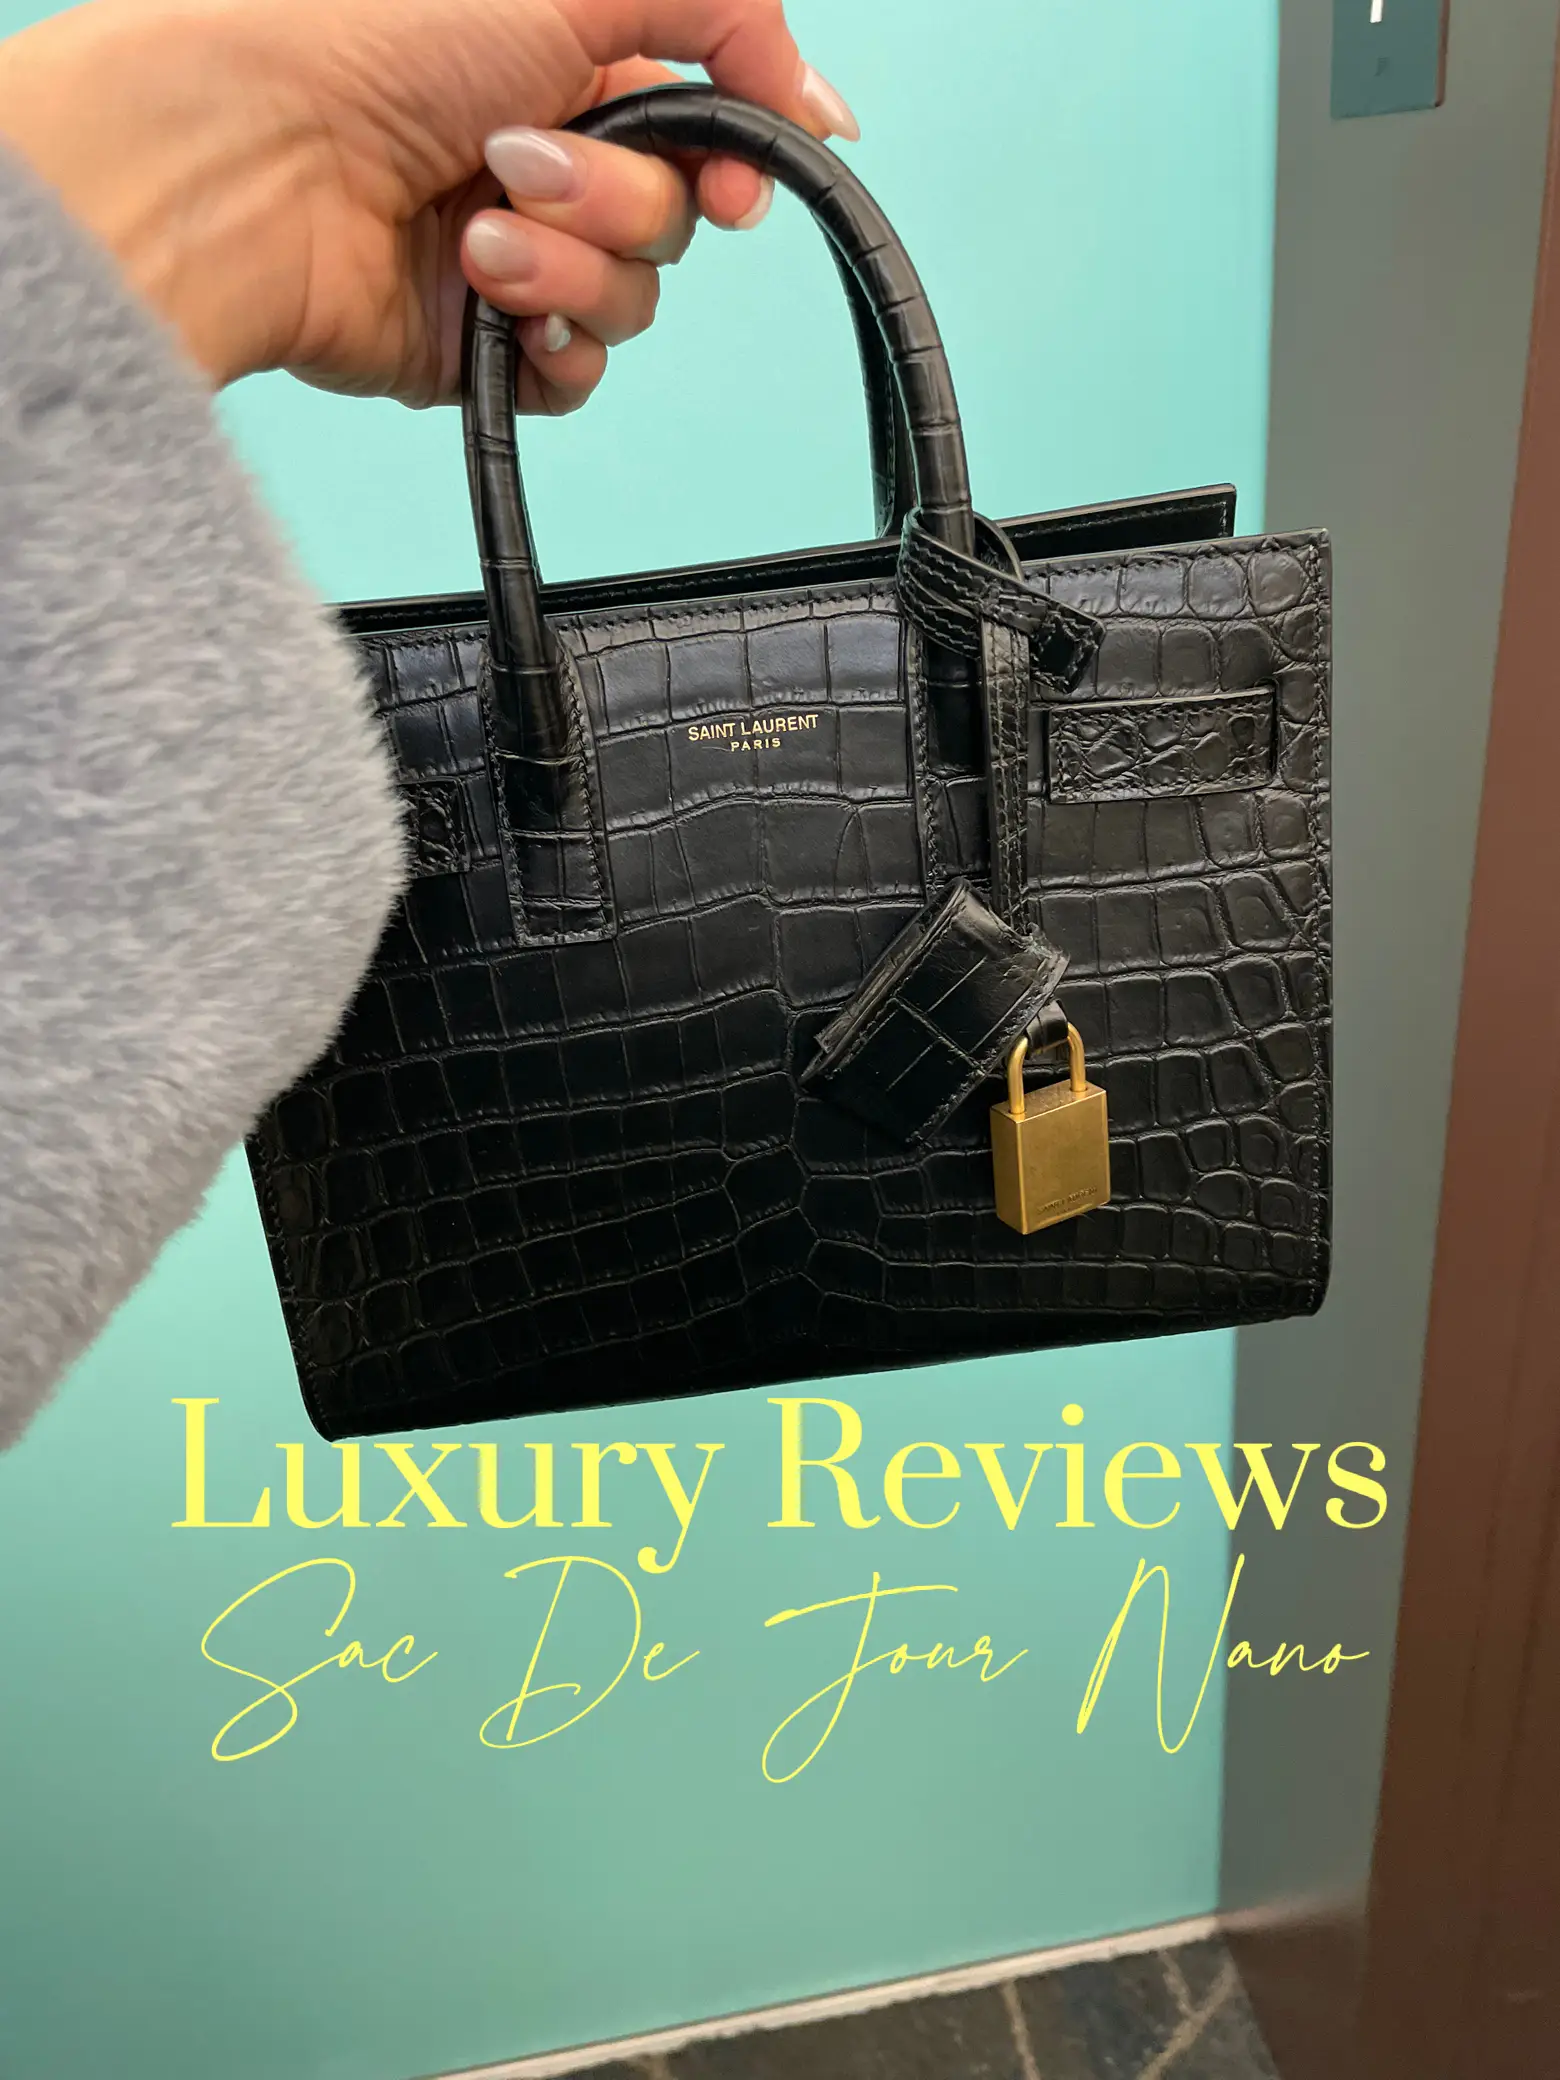 YSL Sac de Jour Review, What's In My Bag